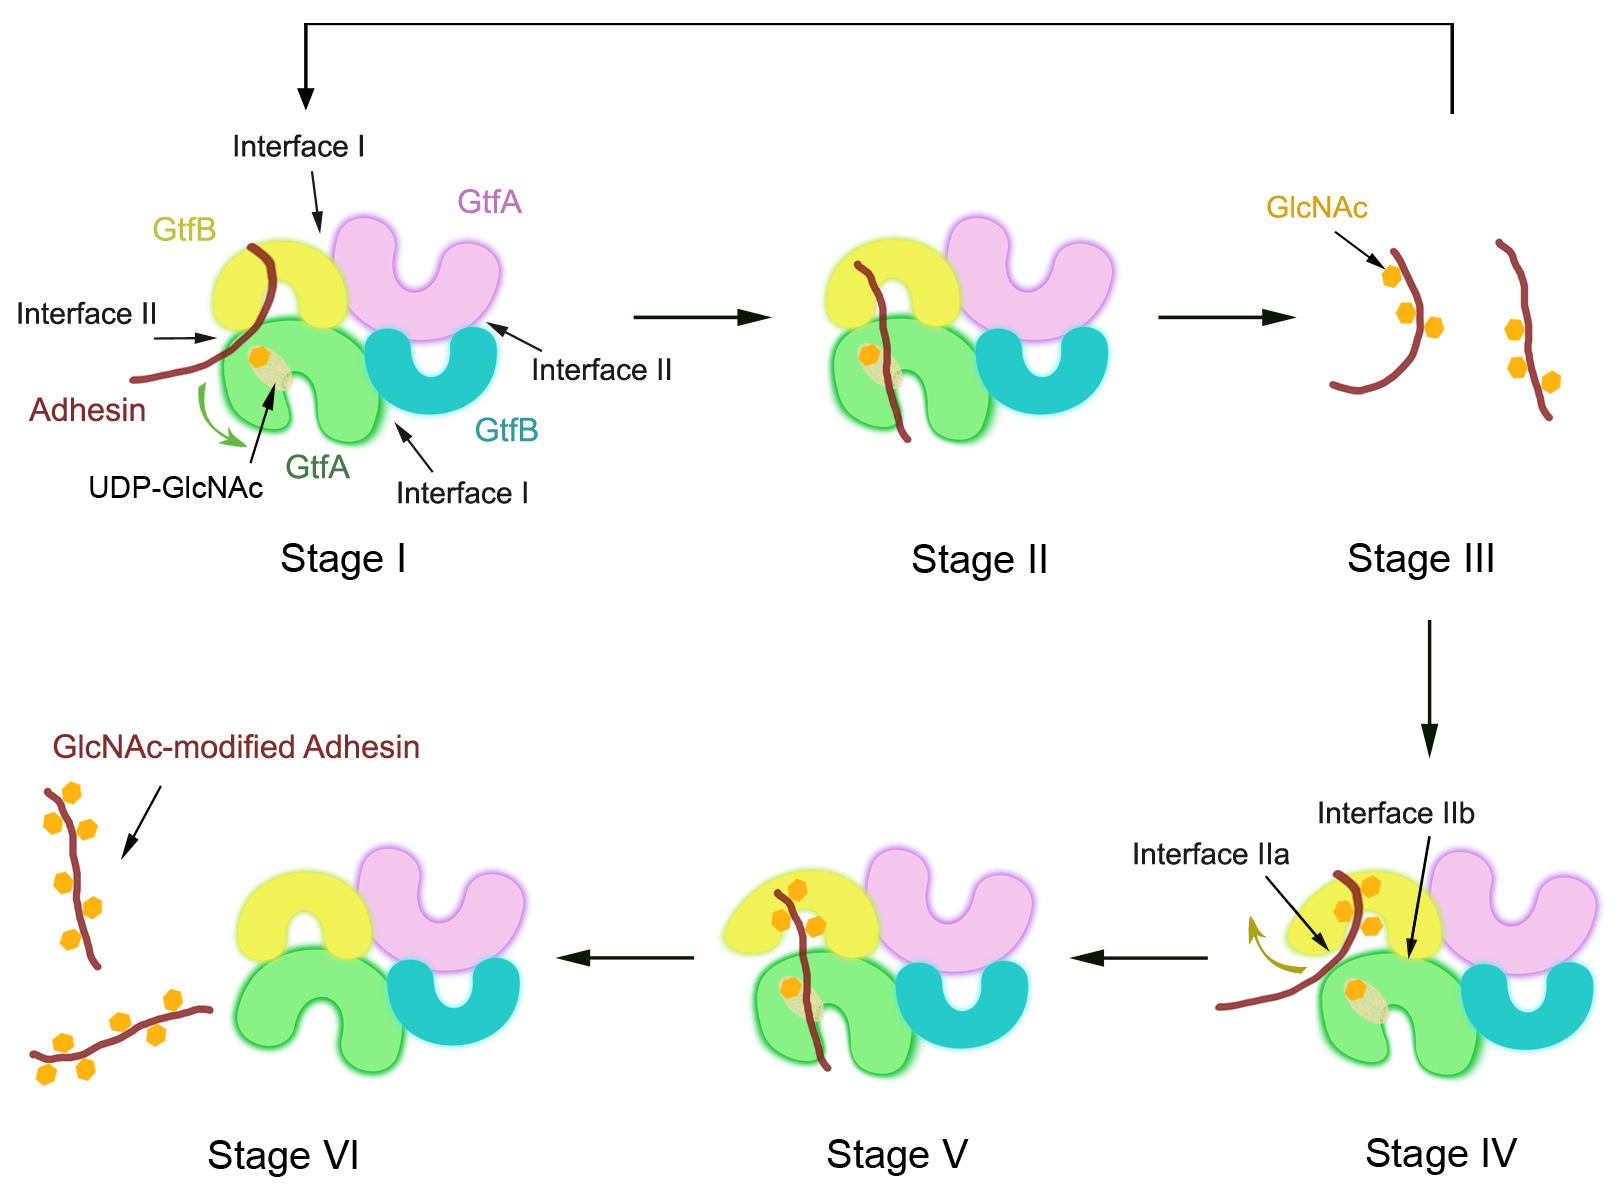 Digram of different stages of cells